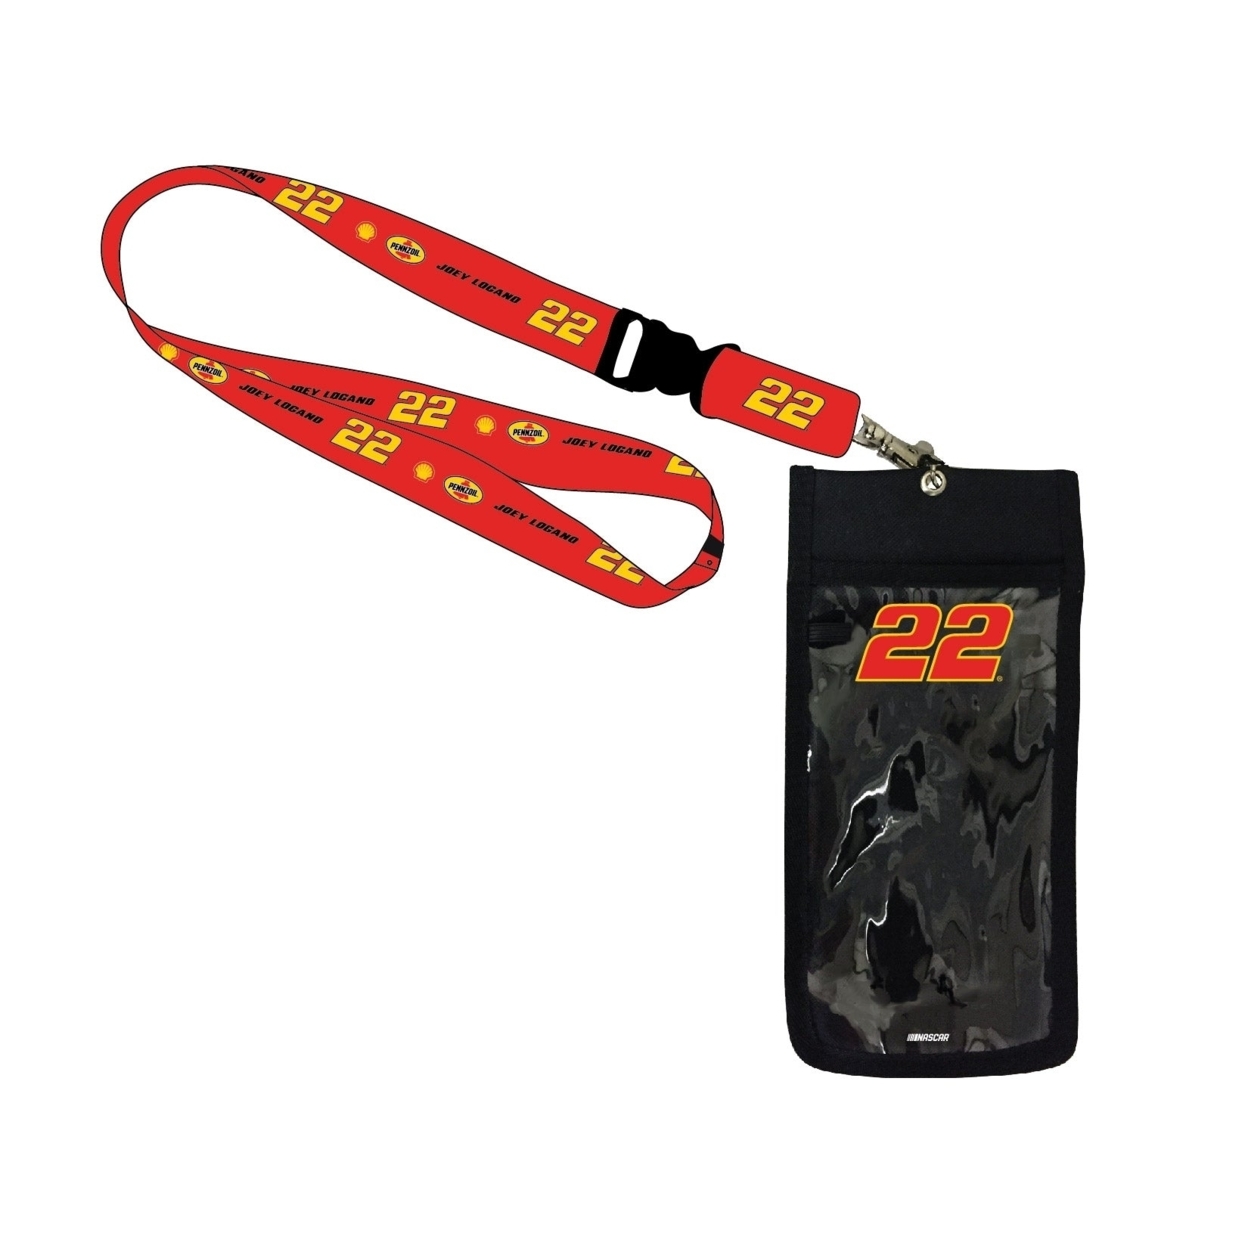 Joey Logano #22 Racing Nascar Deluxe Credential Holder W/Lanyard New For 2020